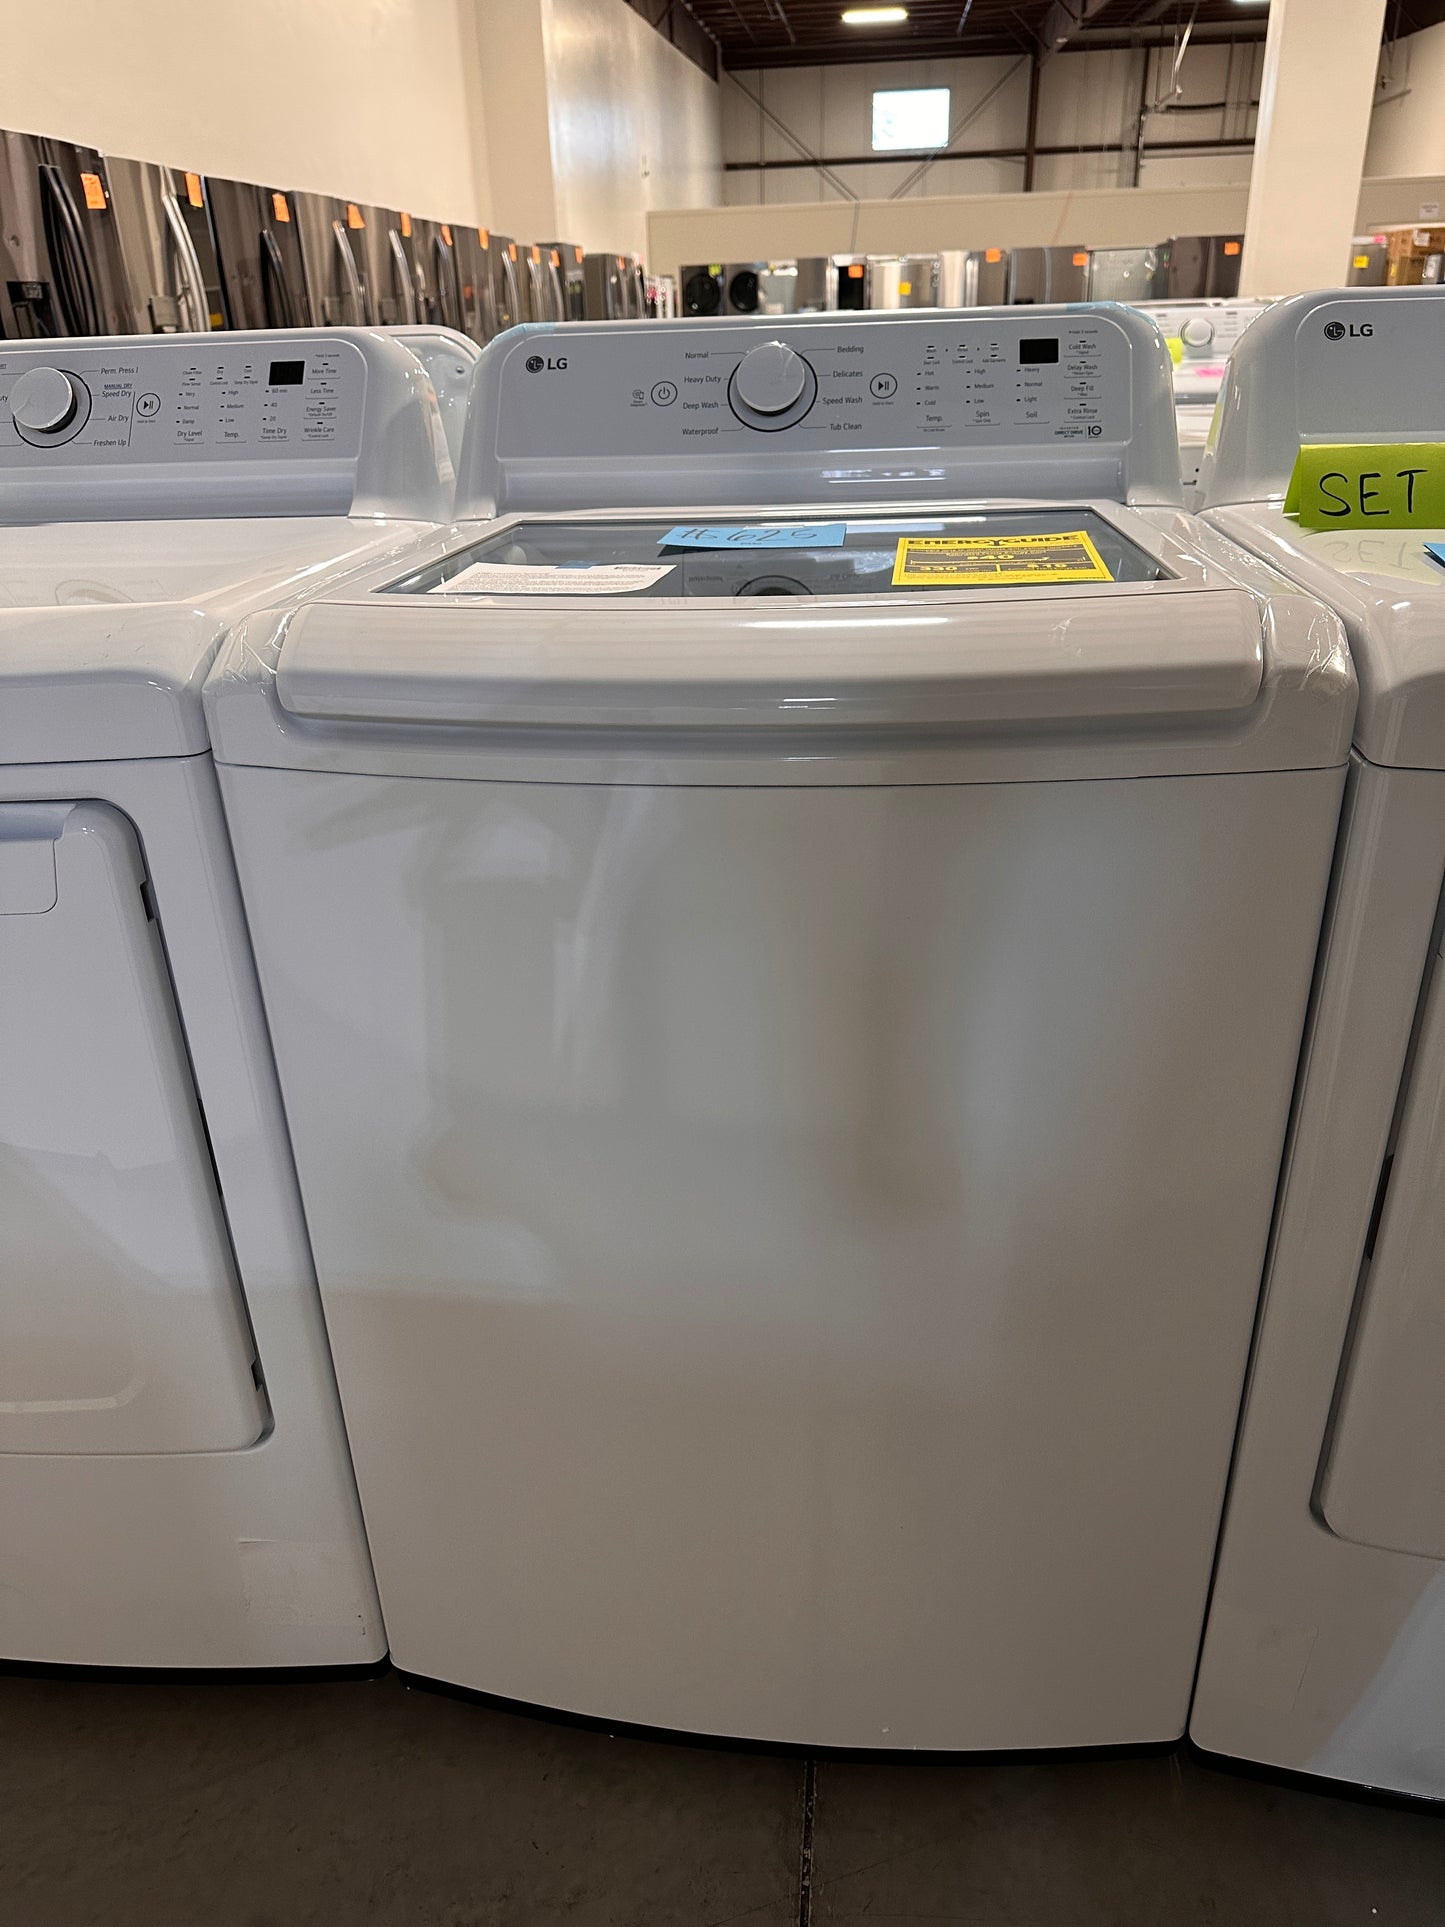 MODEL WT7005CW TOP LOAD LG WASHER - WAS12739